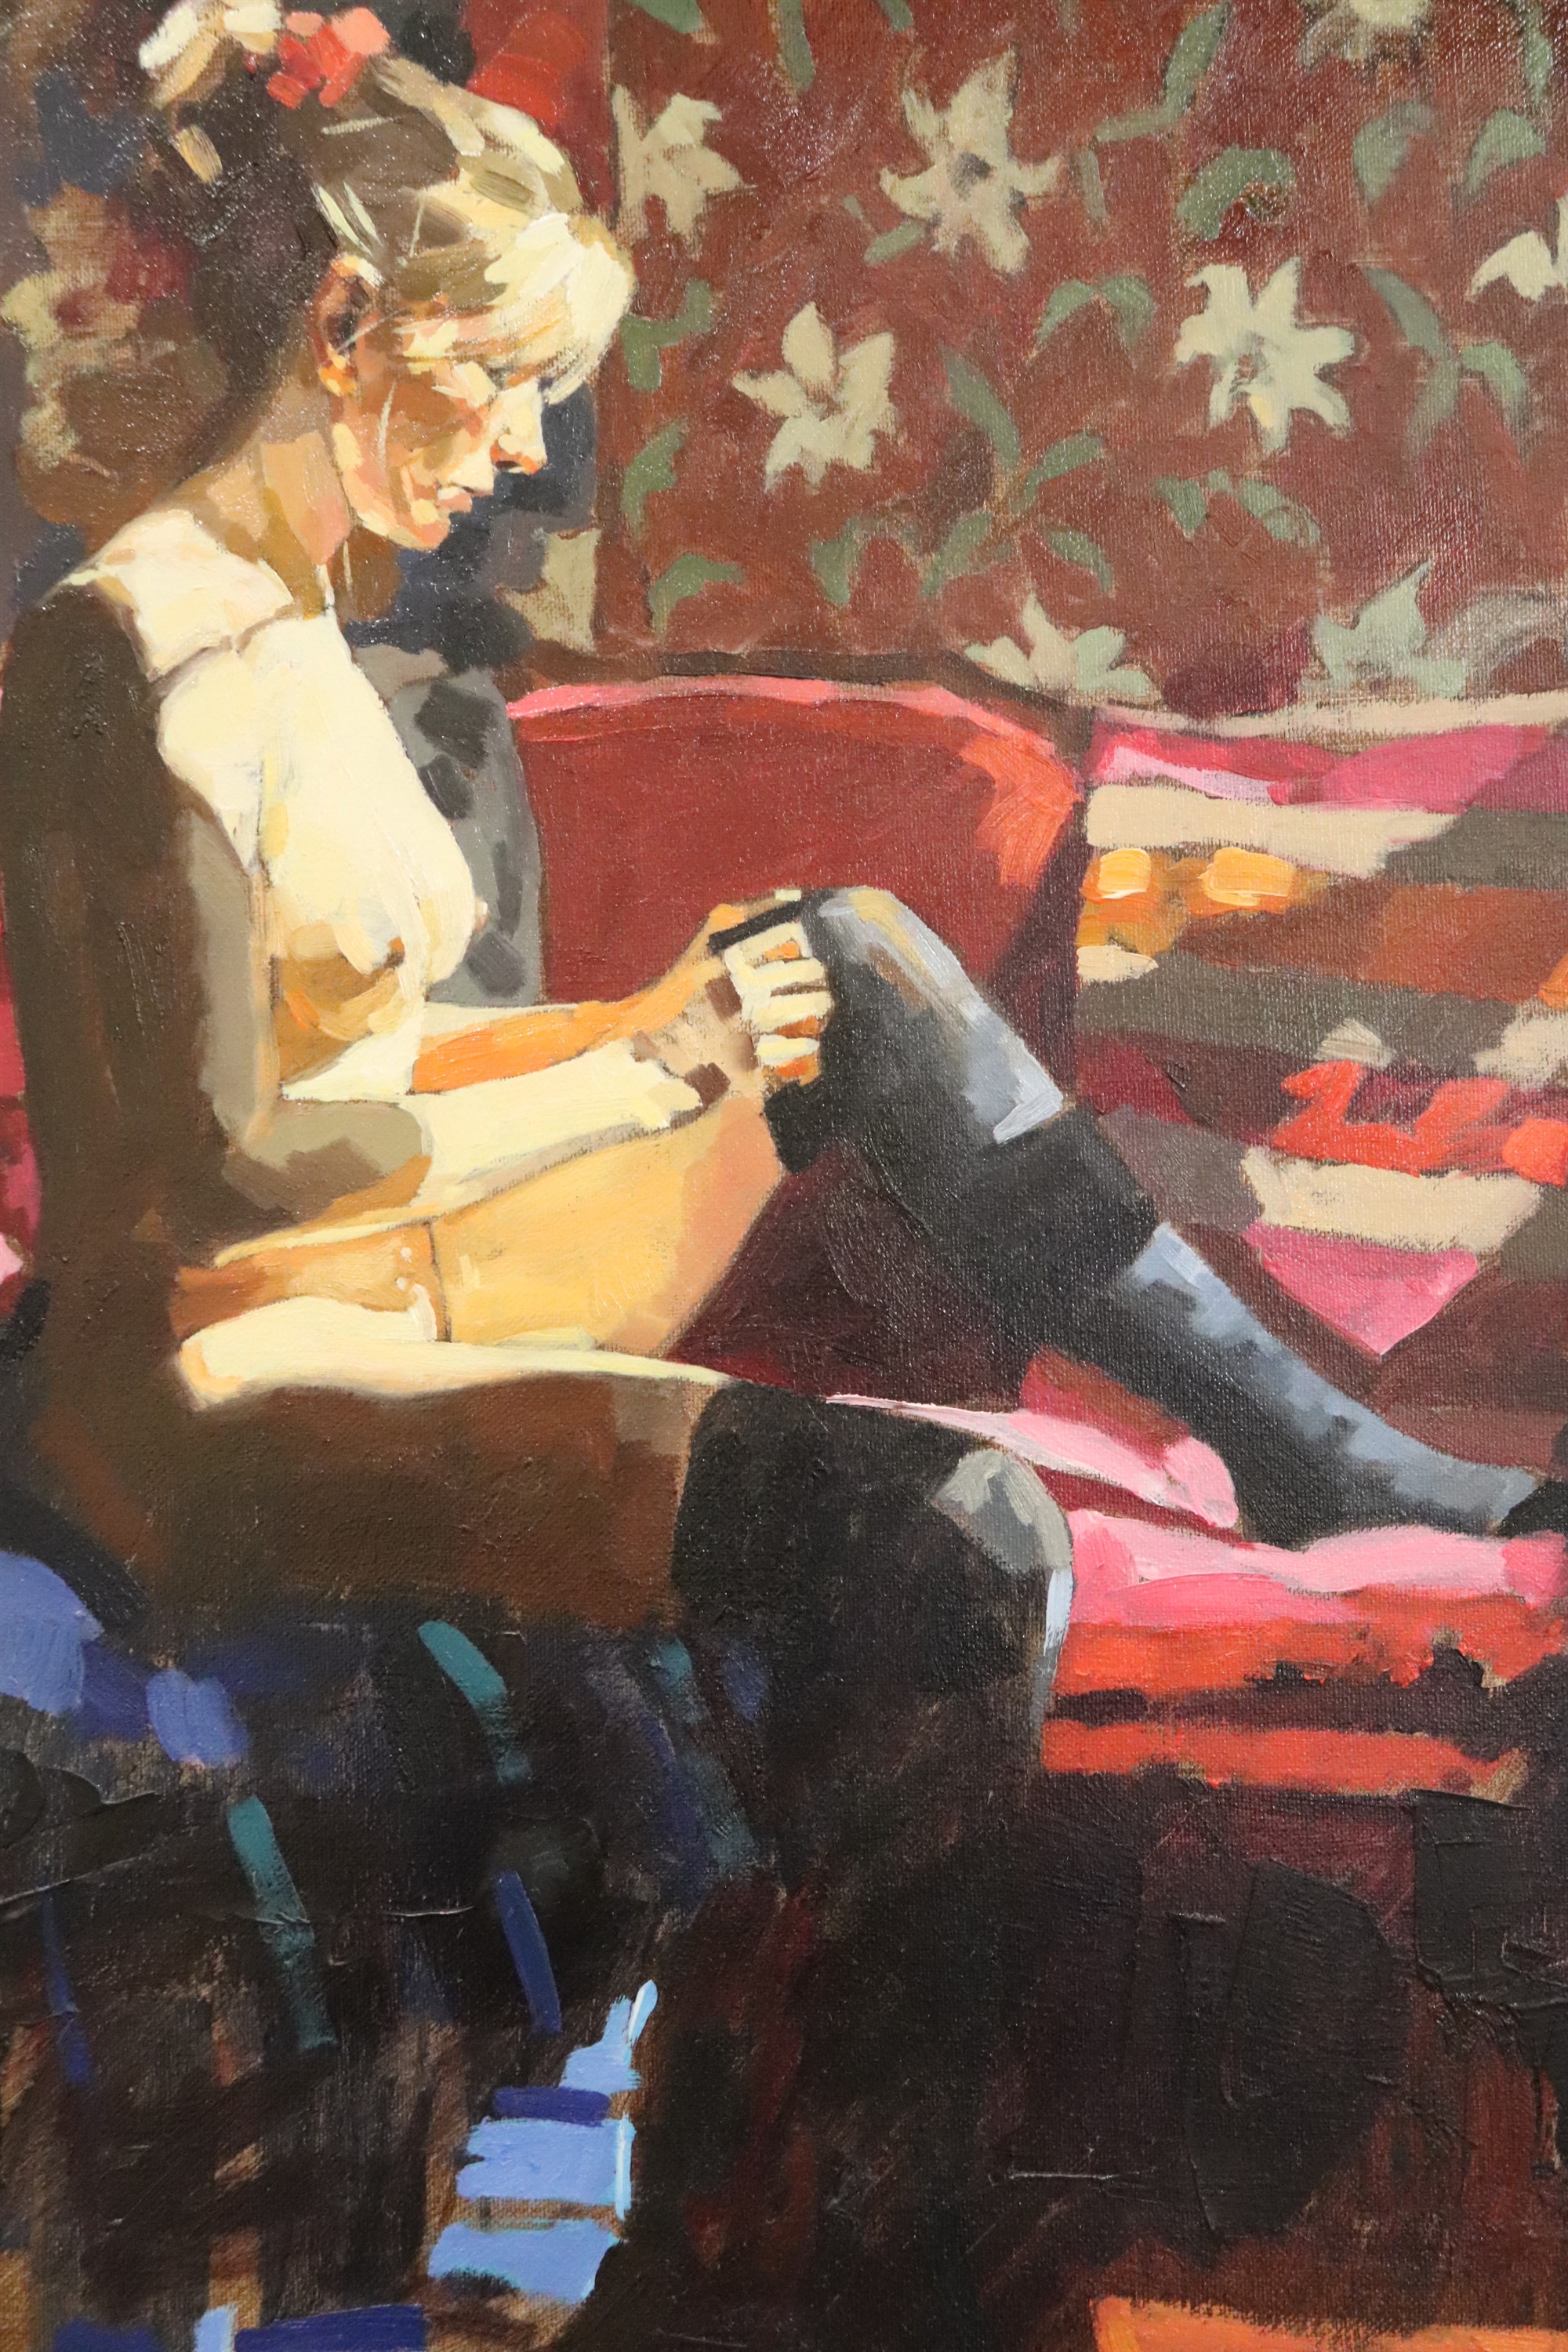 Jack Morrocco (Scottish, Contemporary) "Dressing in Sunlight", oil on canvas, Thompson's gallery - Image 2 of 4